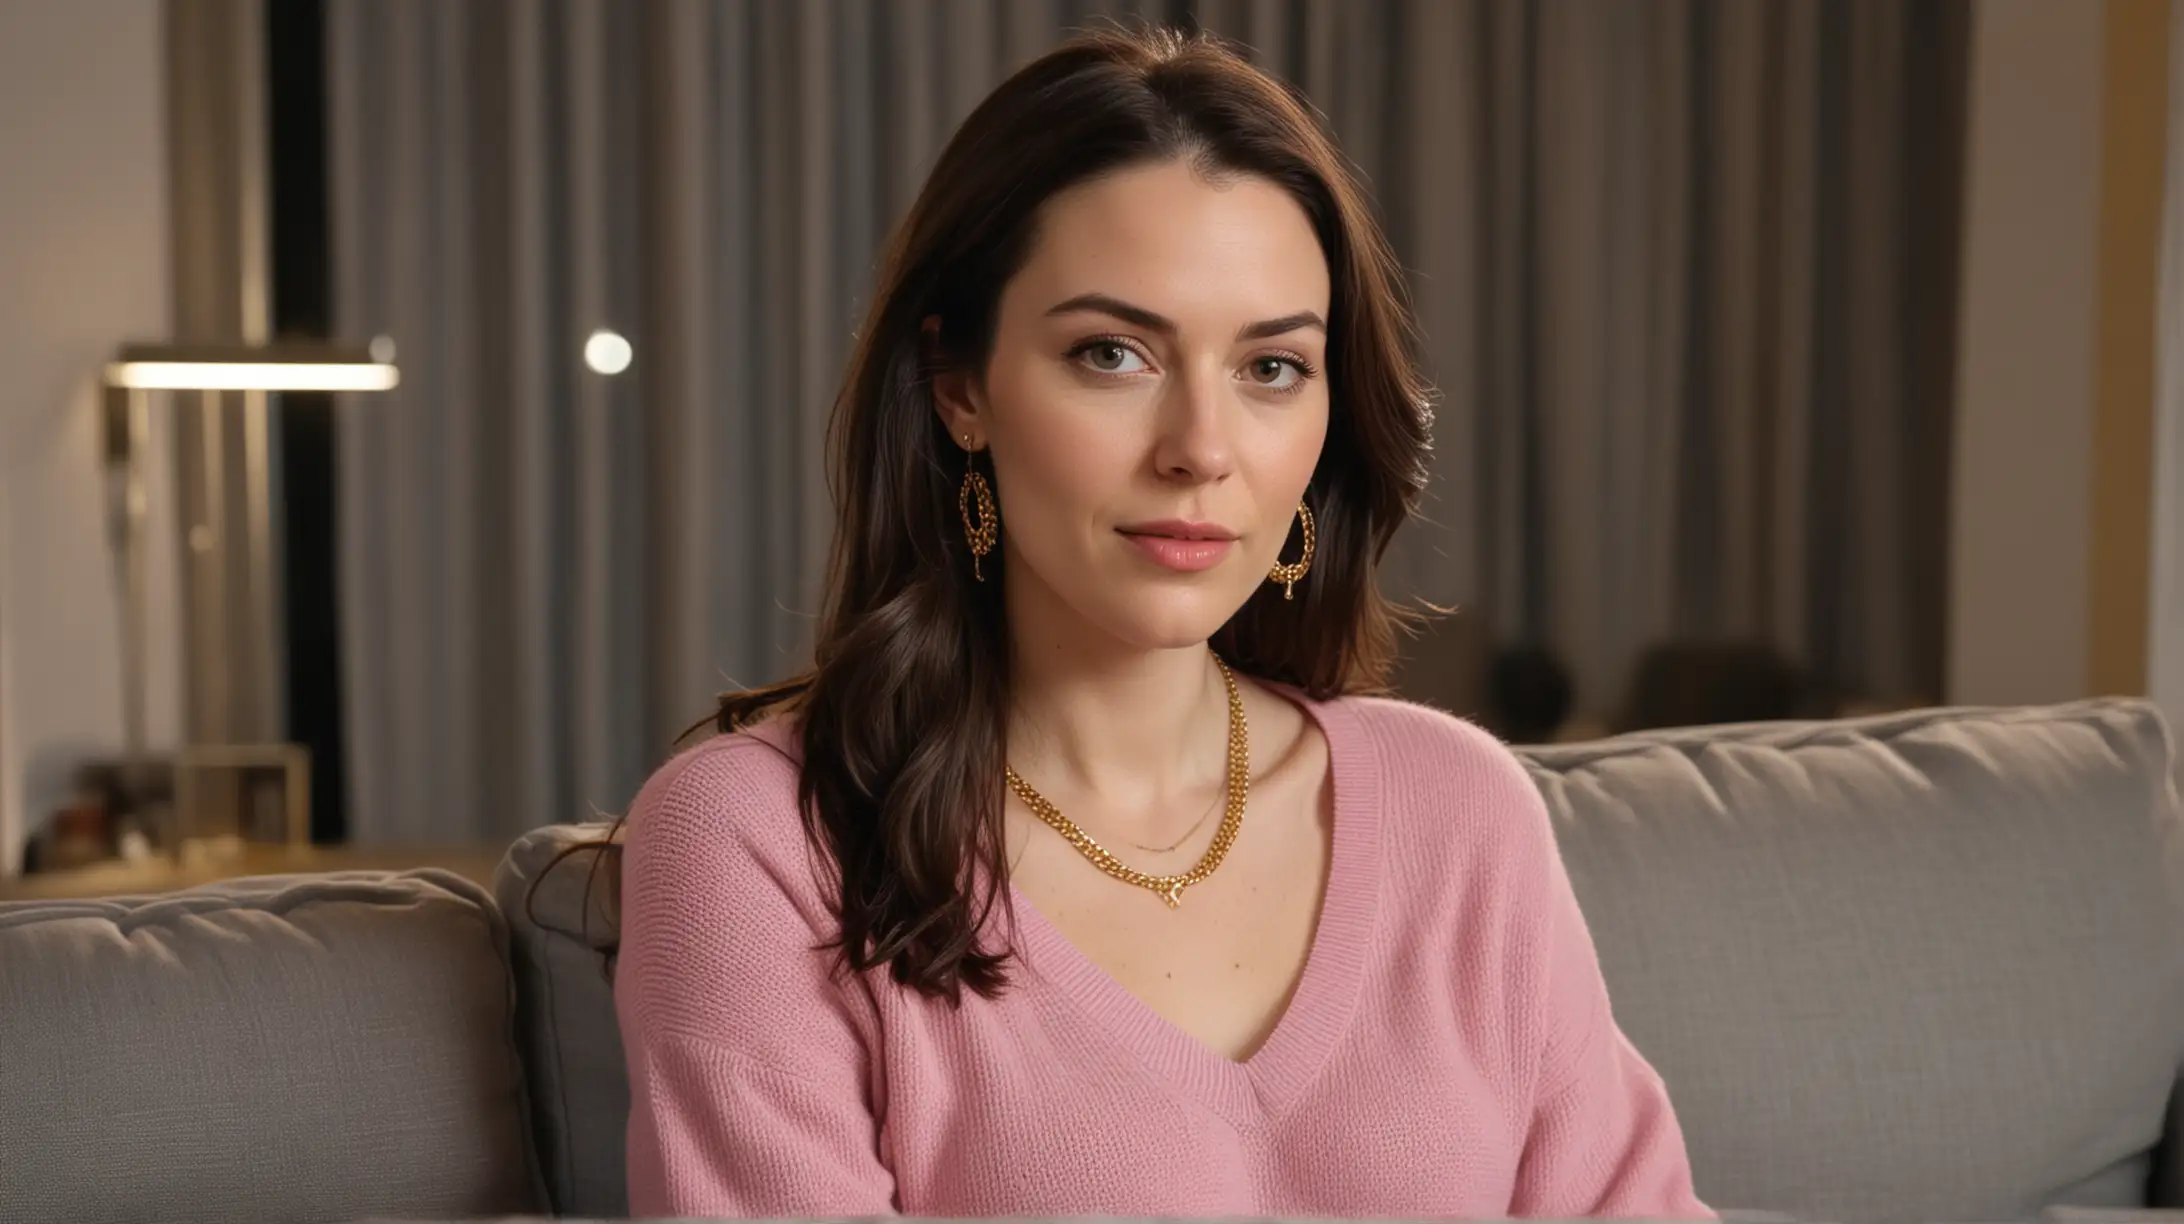 Closeup of 30 year old pale white woman with long dark brown hair parted to the right, wearing a pink sweater and gold necklace and earrings, sitting on a gray couch, modern high rise urban apartment background late at night